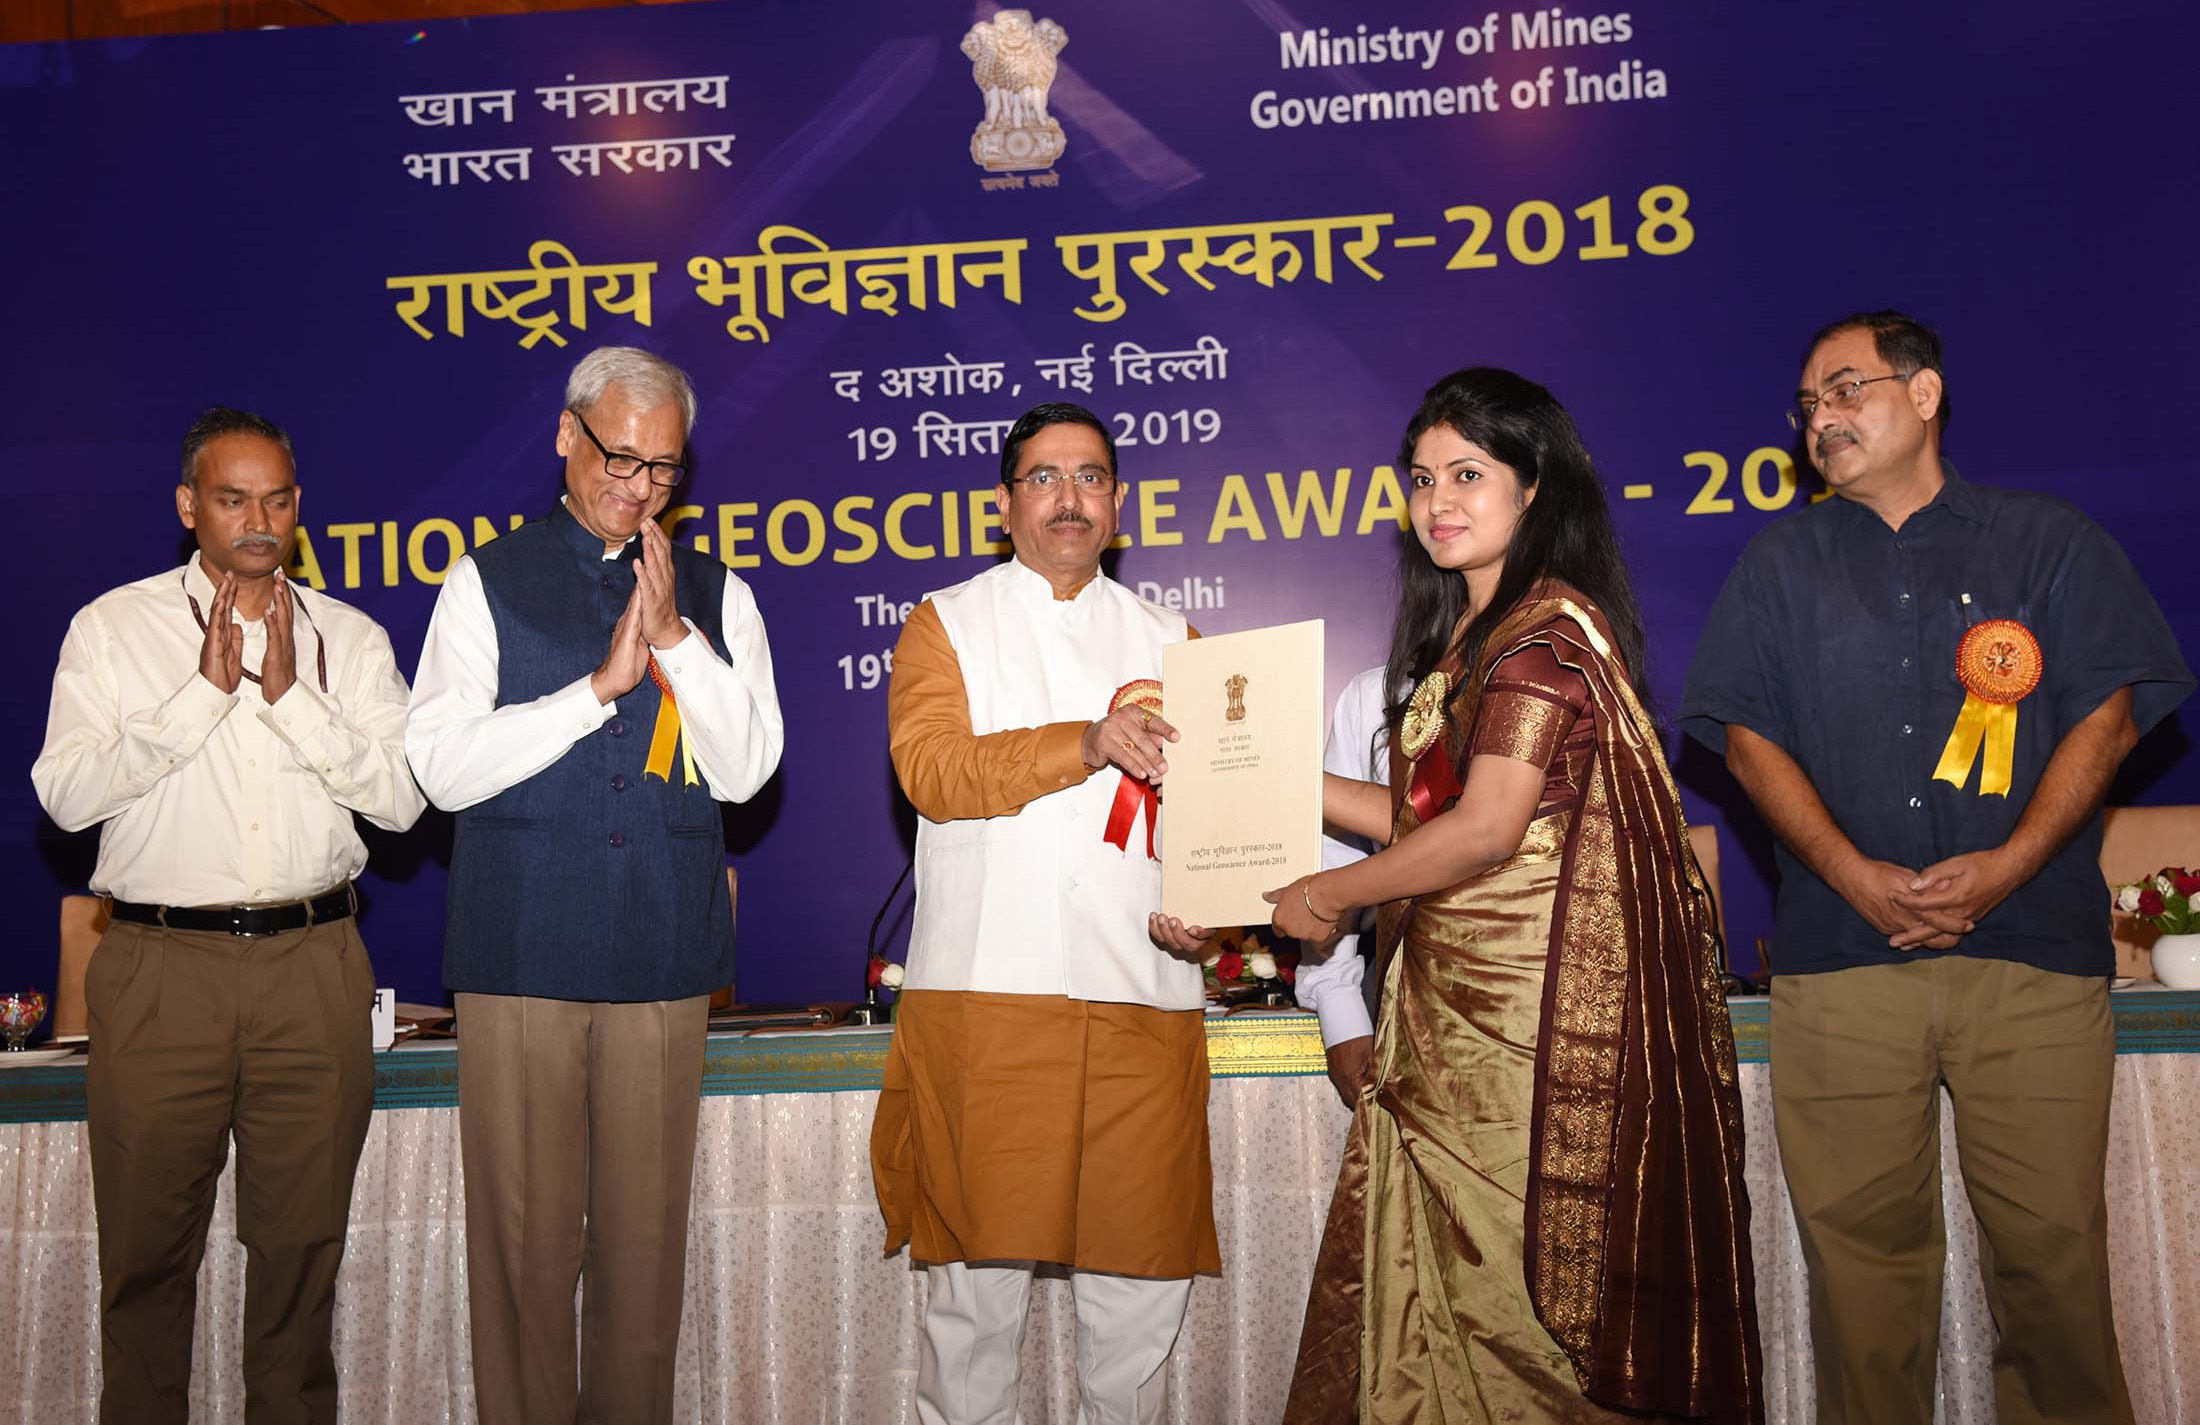 The Union Minister for Parliamentary Affairs, Coal and Mines, Shri Pralhad Joshi presenting the National Geoscience Awards - 2018, at a function, in New Delhi on September 19, 2019. The Secretary, Ministry of Mines, Shri Anil Gopishankar Mukim and other dignitaries are also seen.